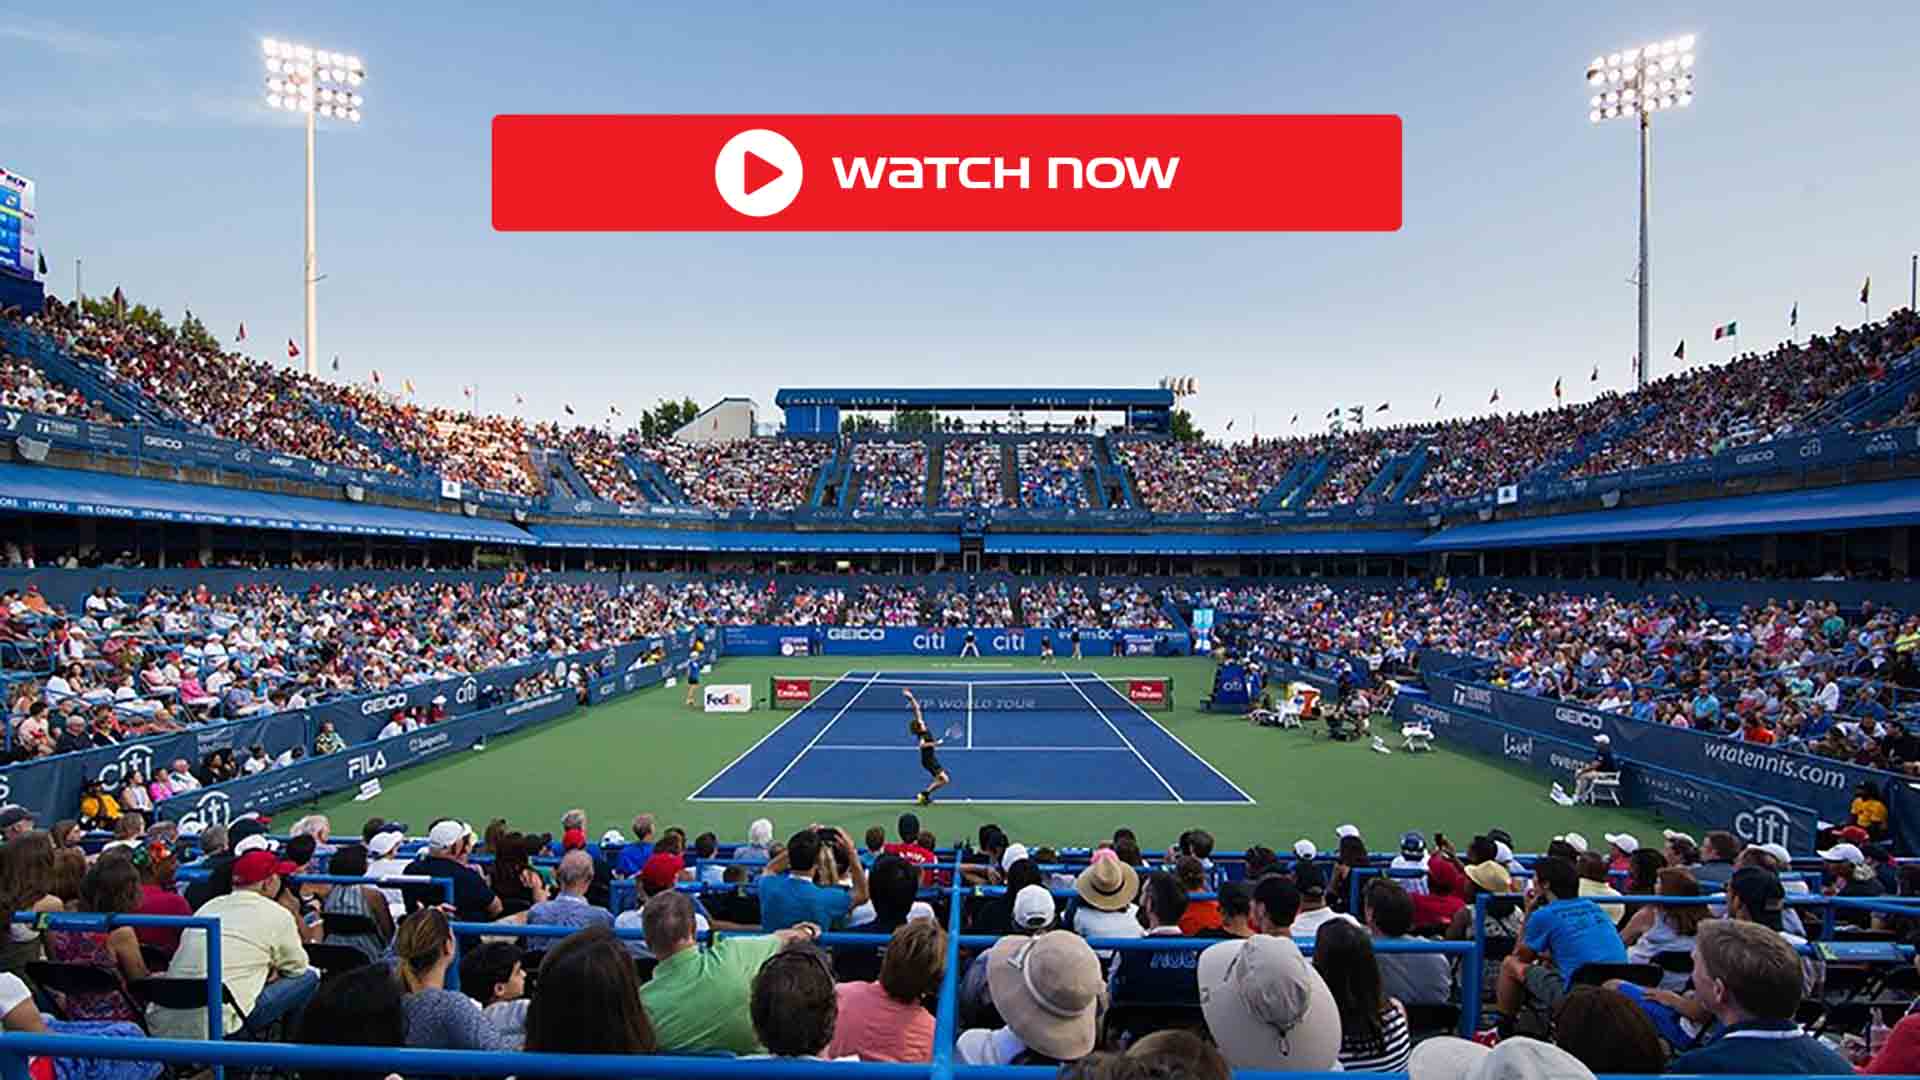 [LIVE] Citi Open 2021 Live Stream, Schedule, How to Watch ATP